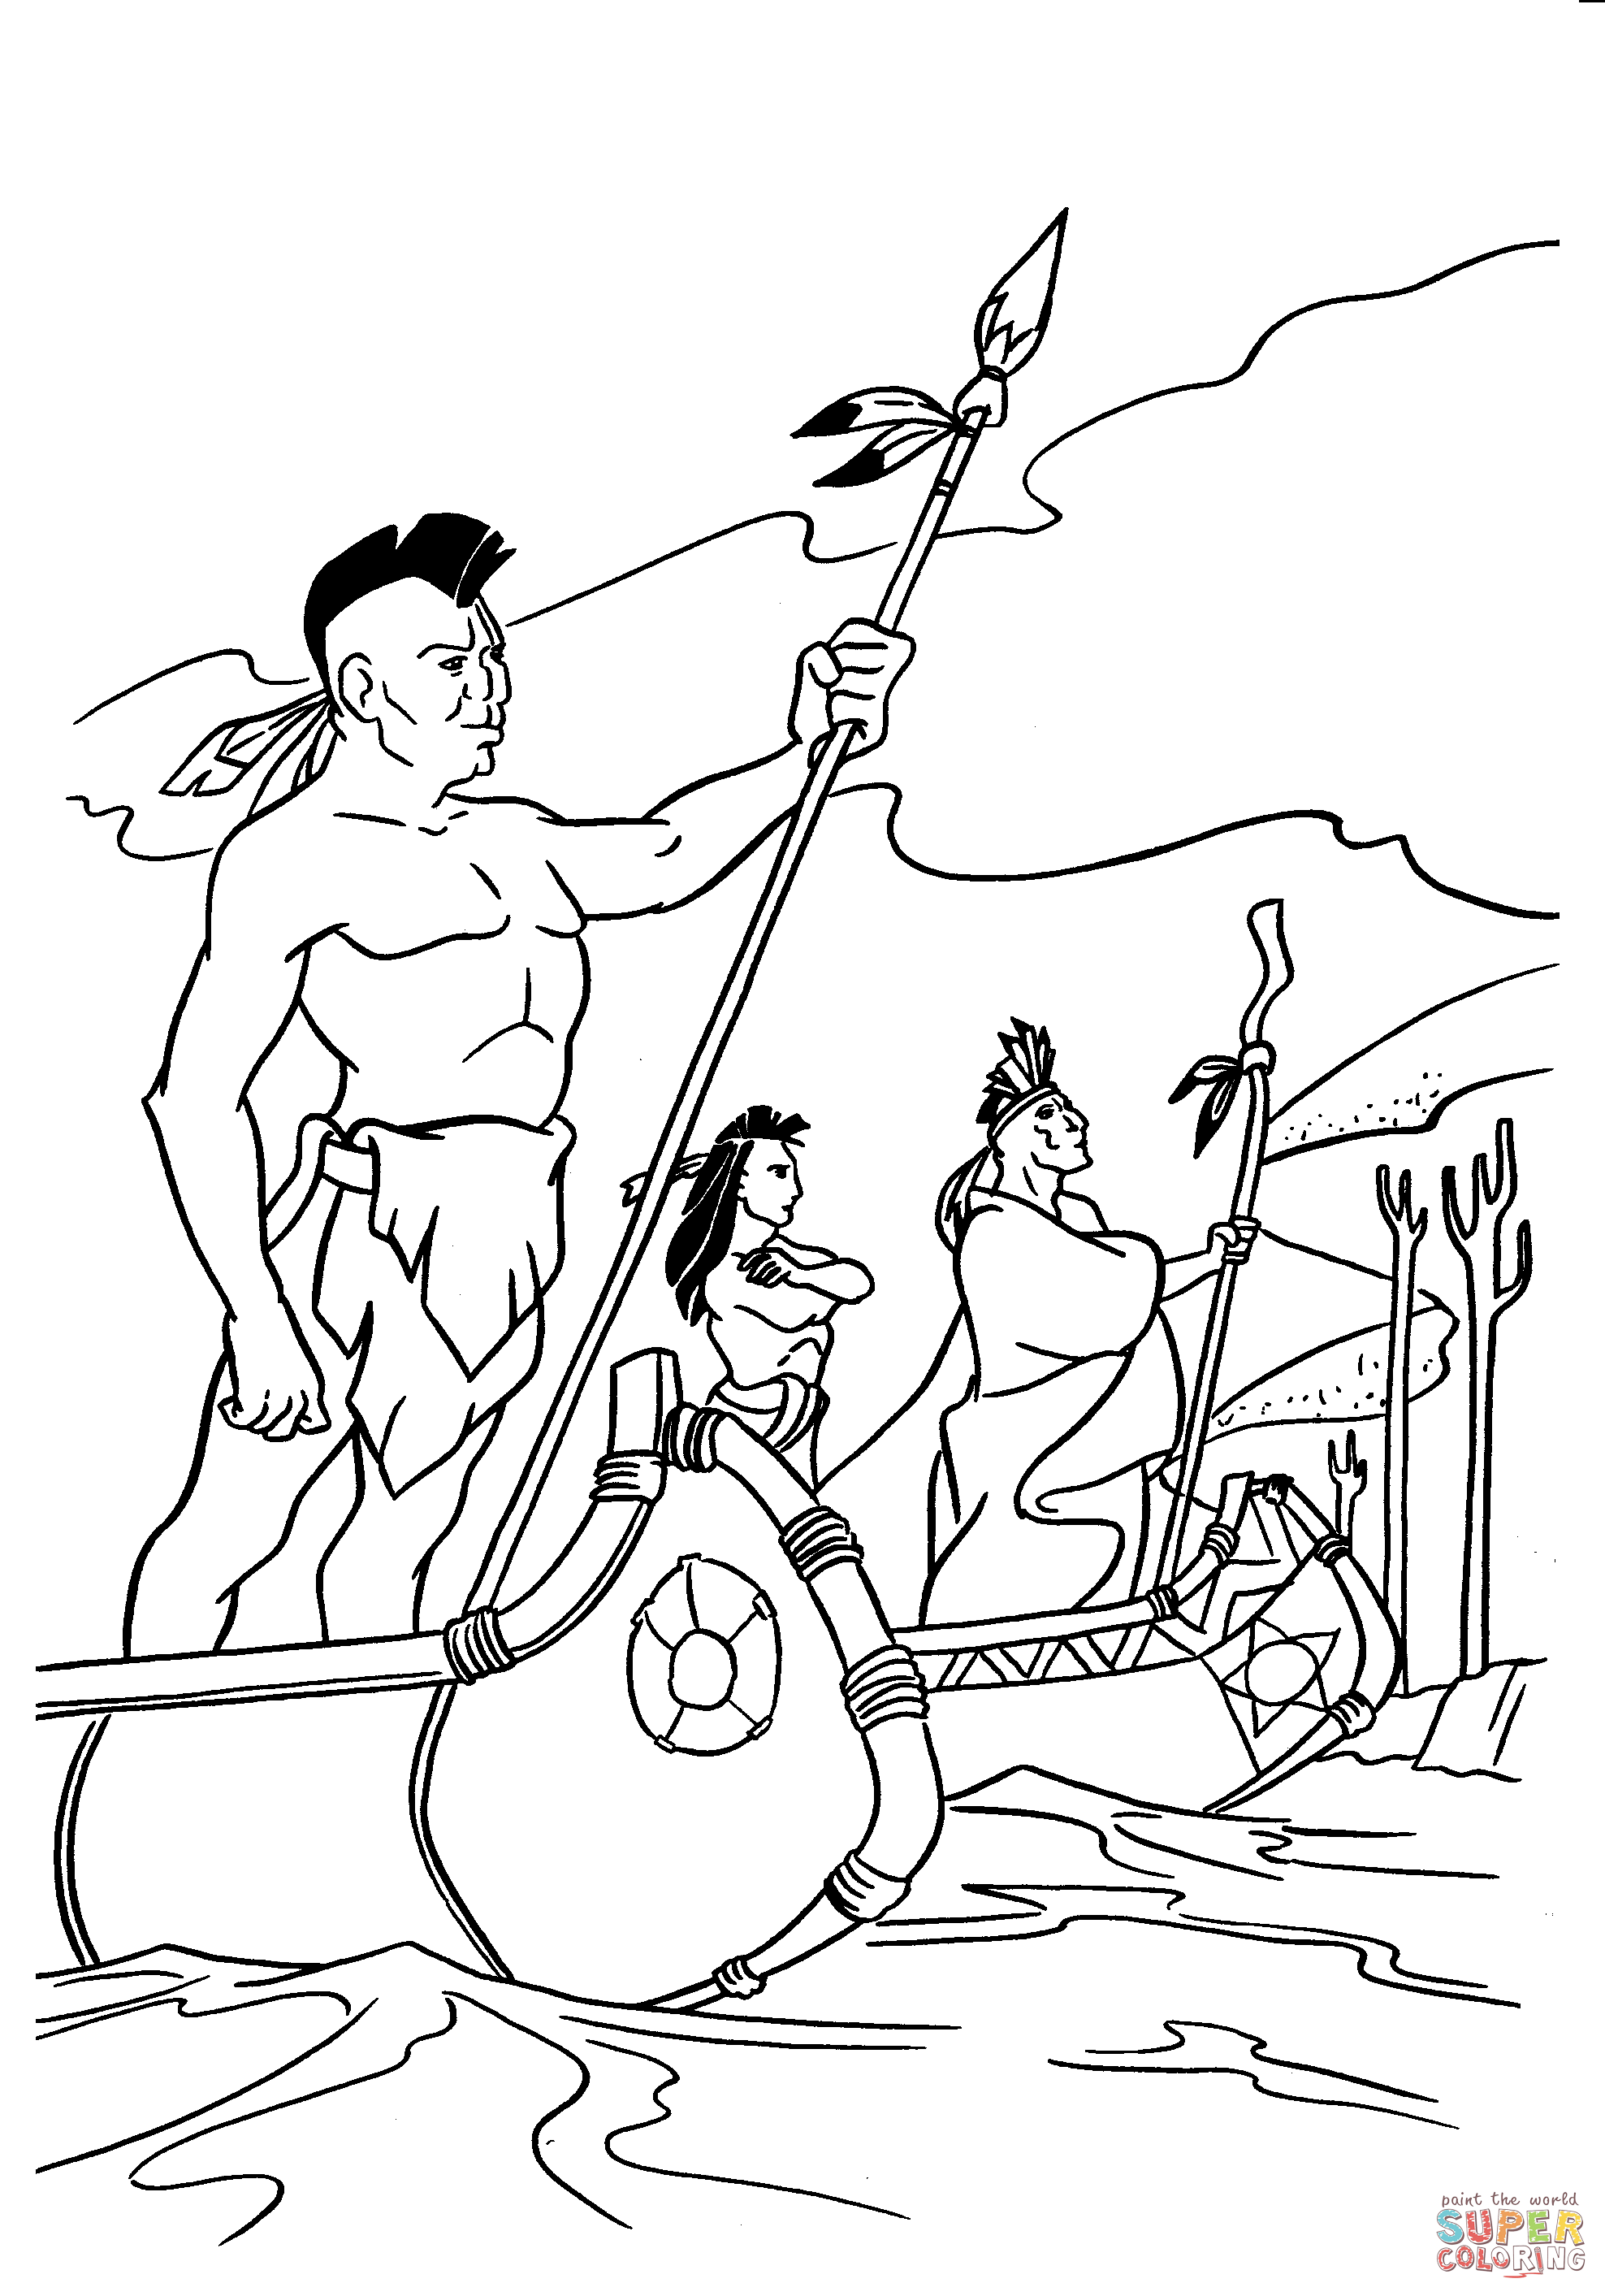 Native Americans Are Coming coloring page | Free Printable ...